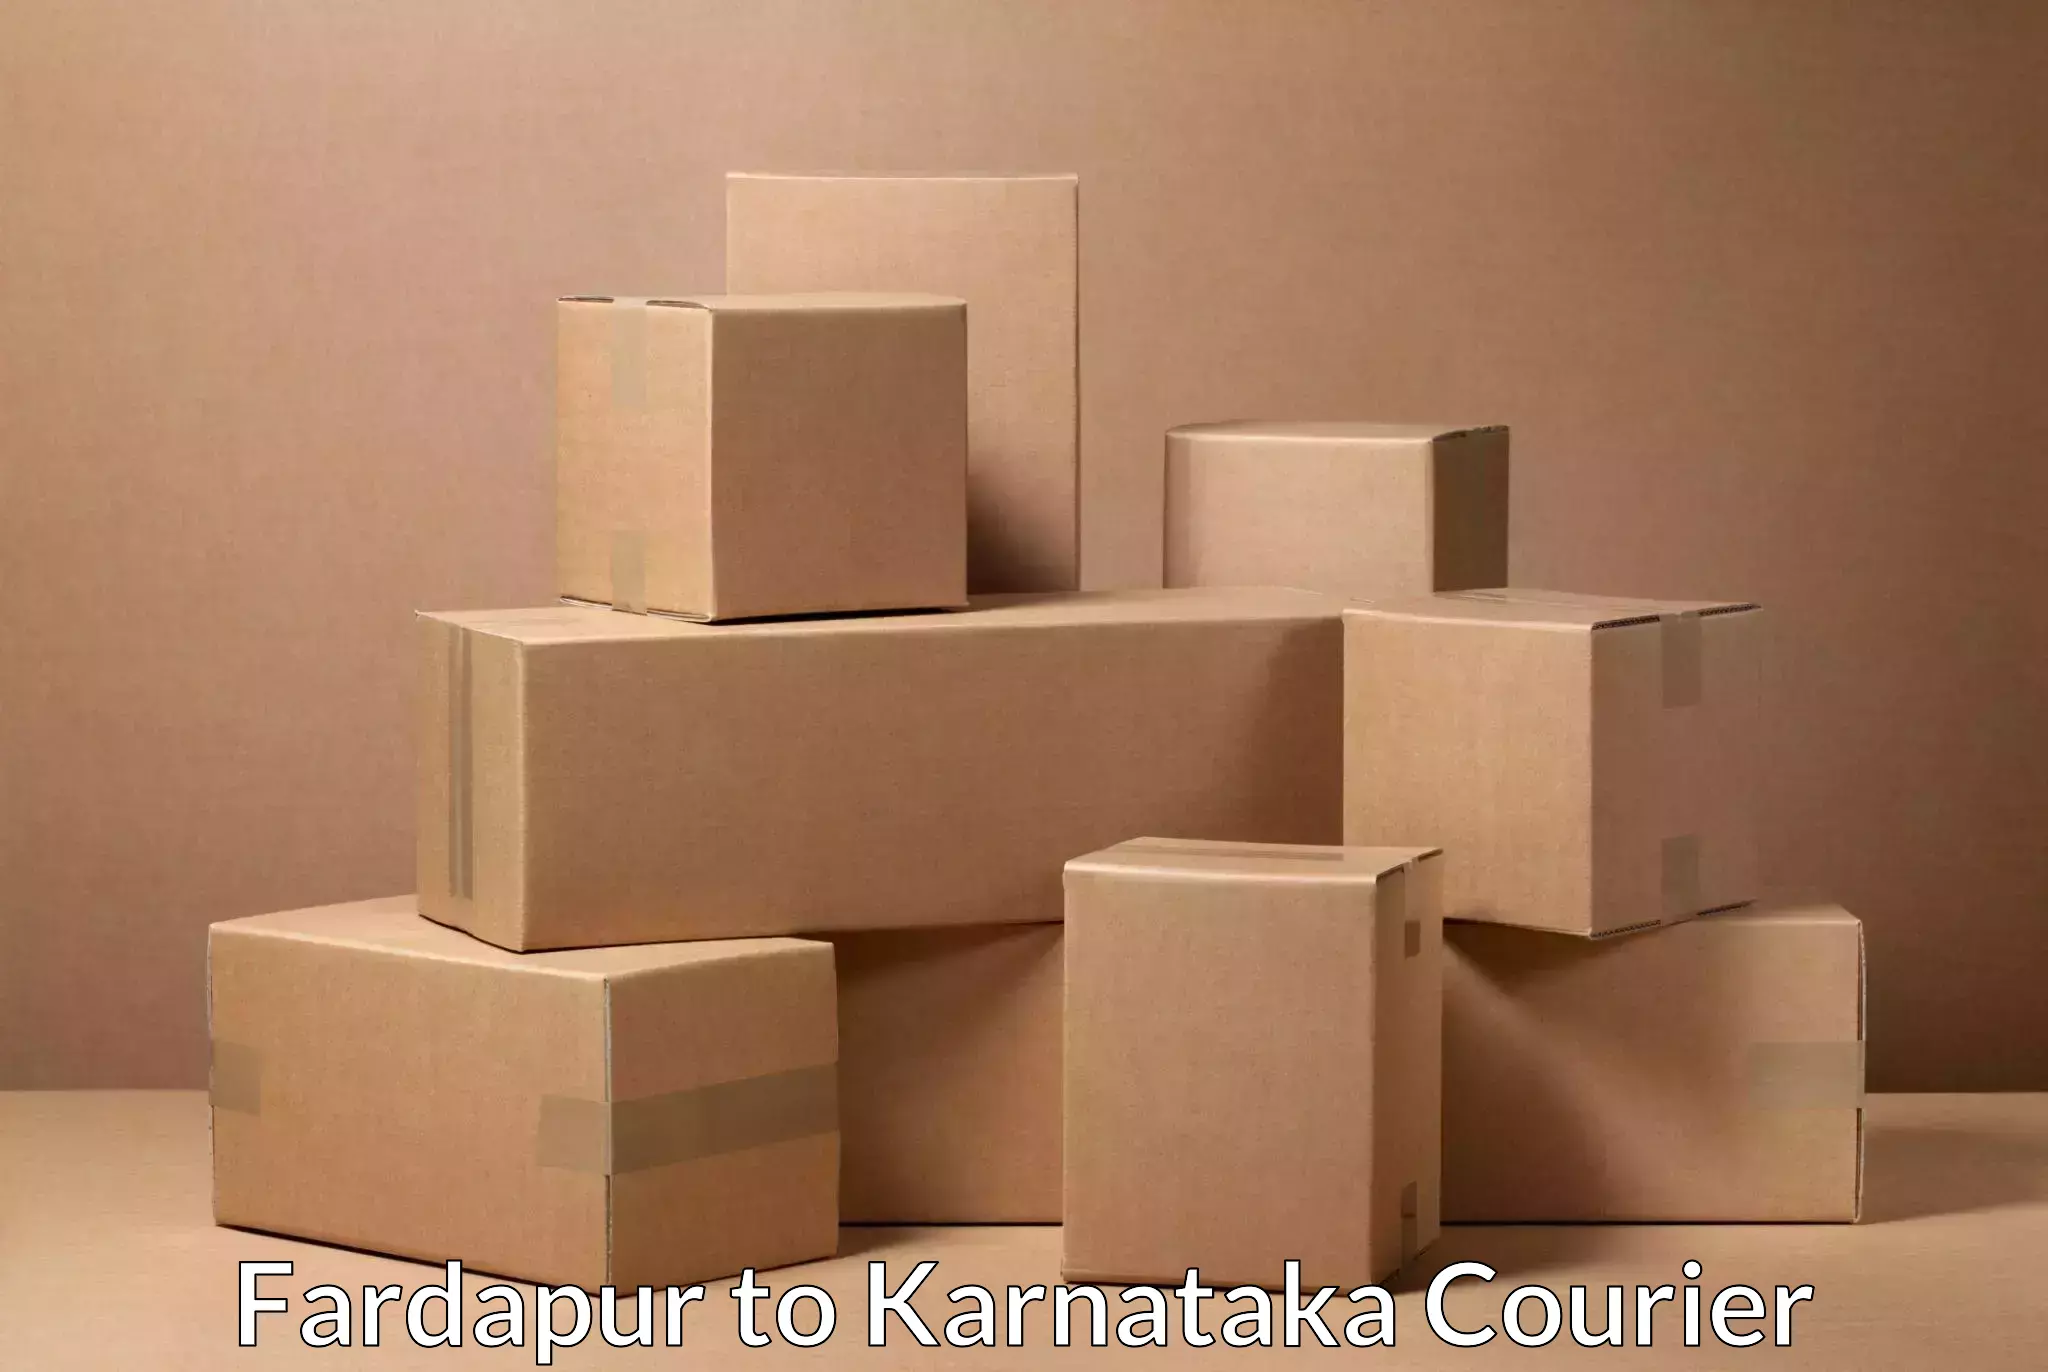 Doorstep delivery service Fardapur to Mangalore Port